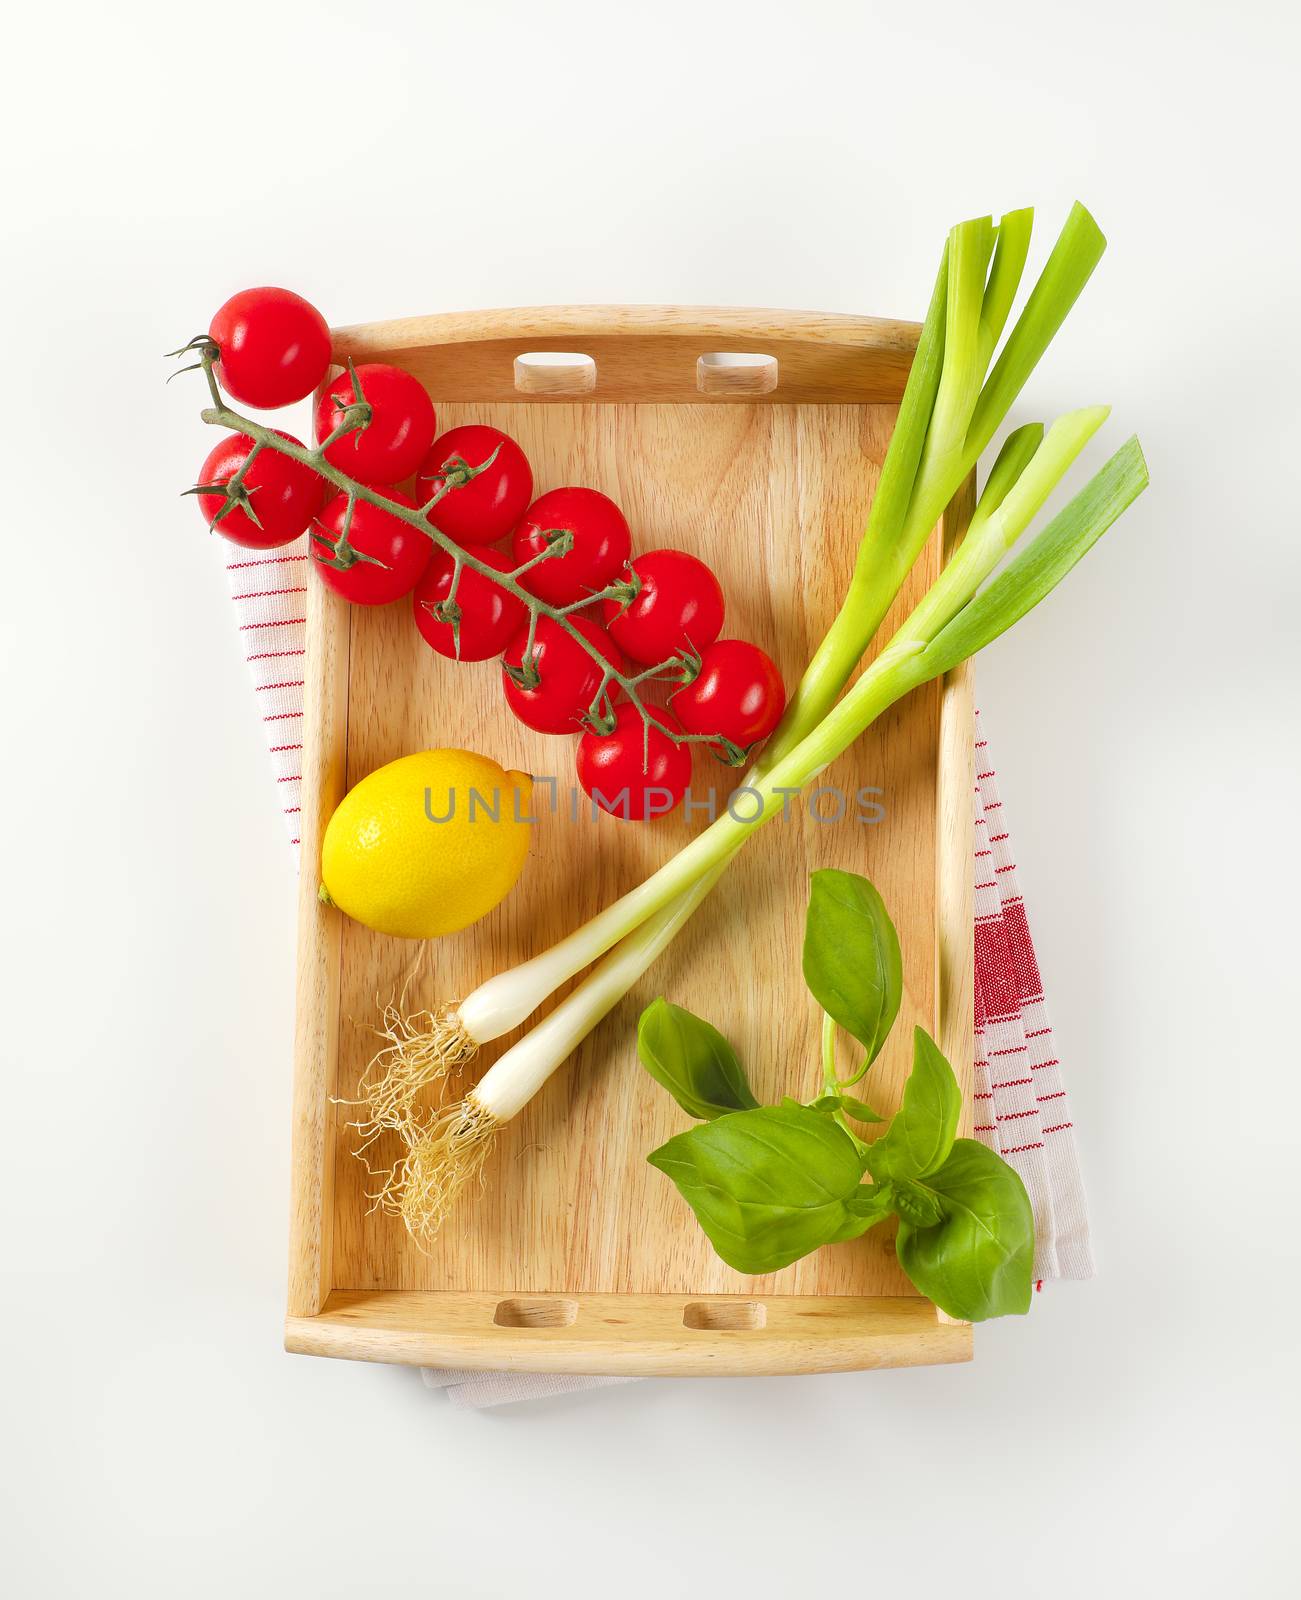 Wooden serving tray wit fresh vegetables and fruit by Digifoodstock